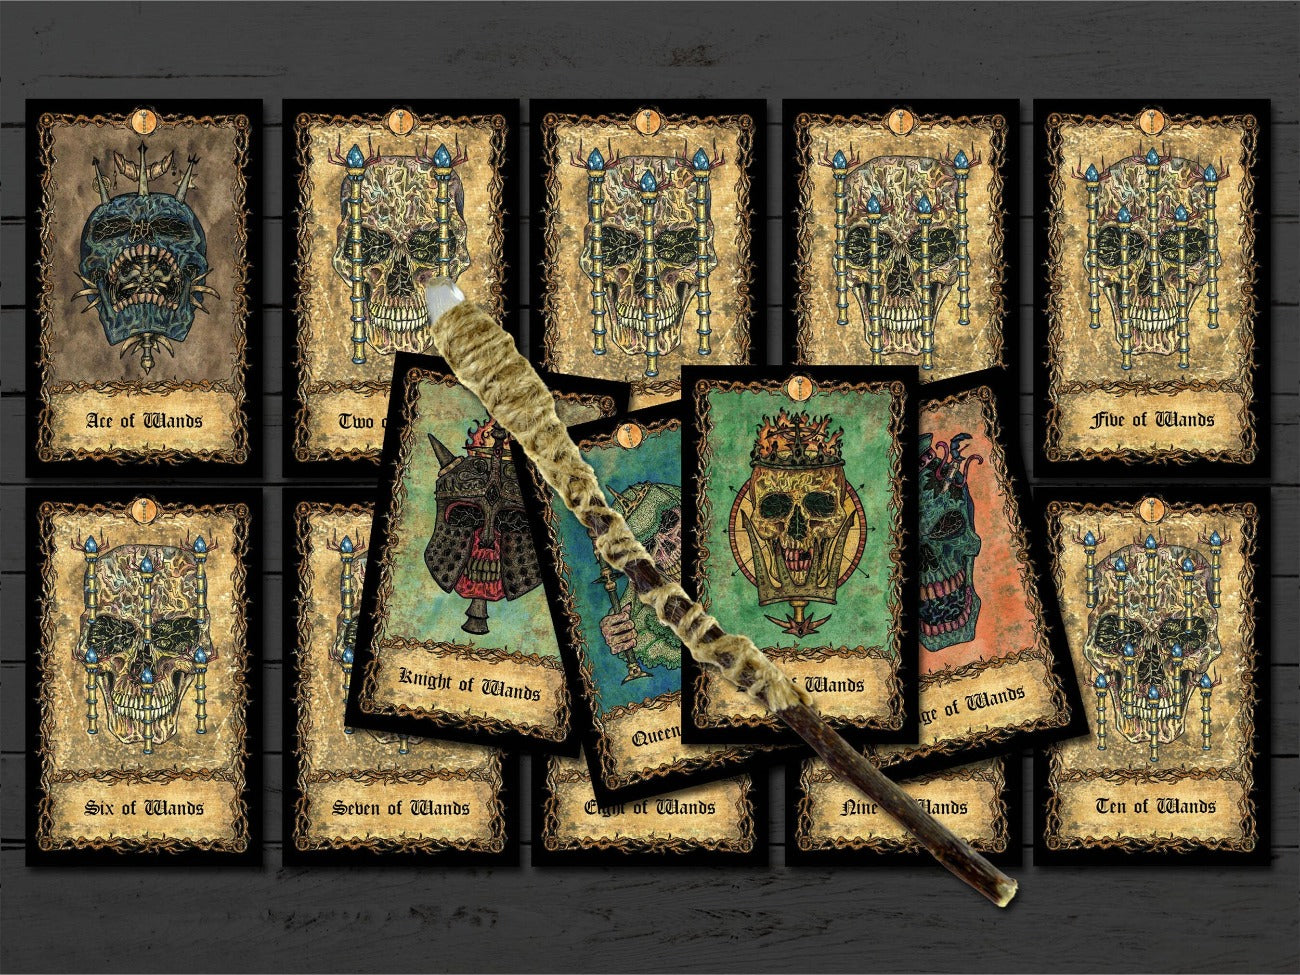 The 14 cards of the suit of Wands from Ace to King.